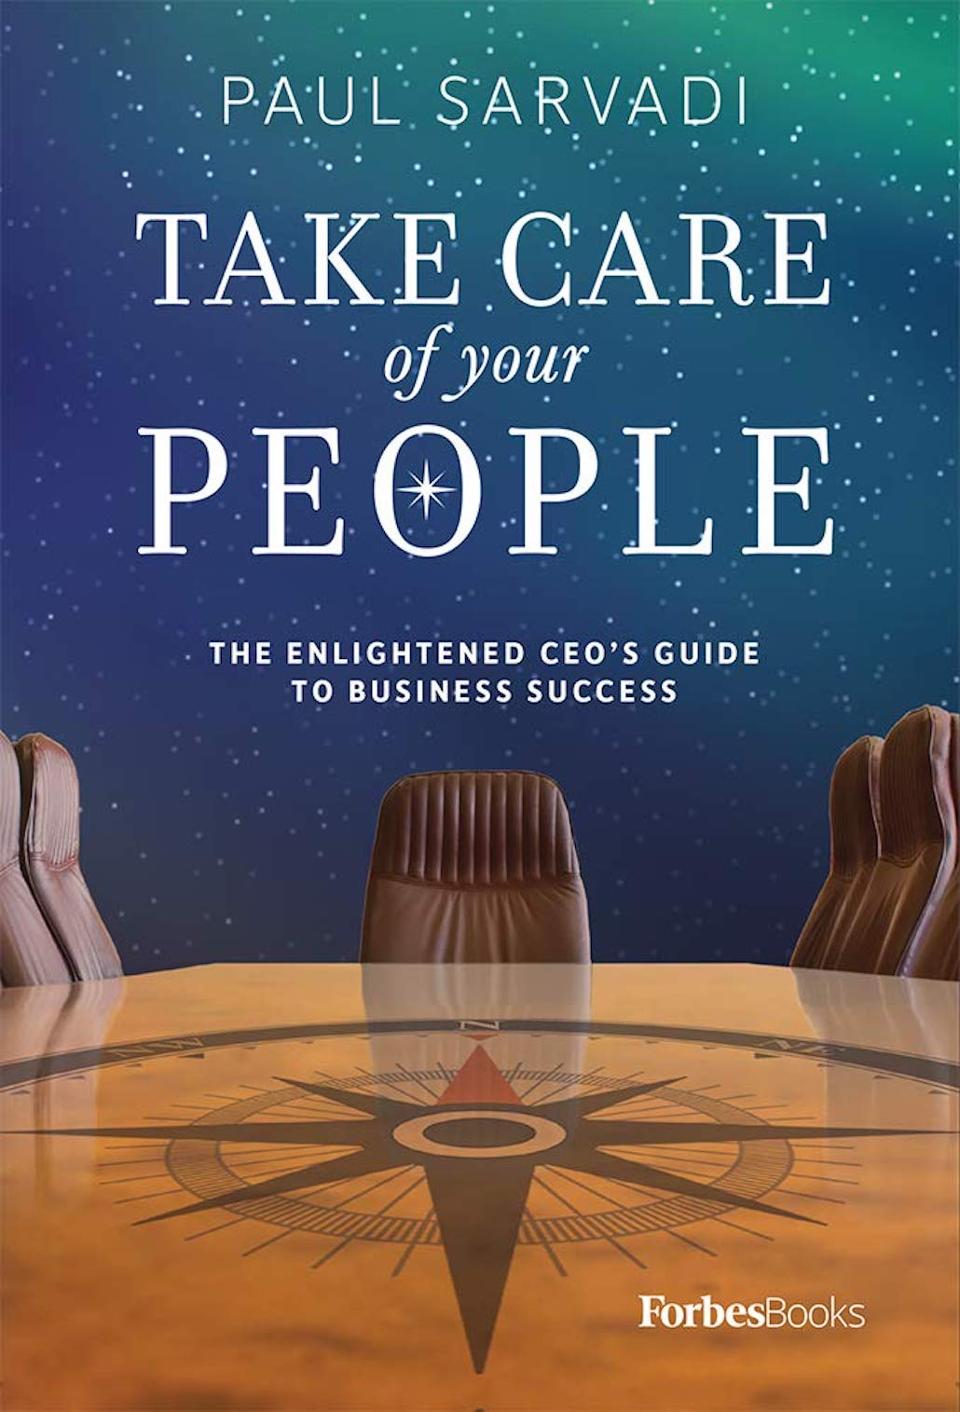 Take Care of Your People: The Enlightened CEO’s Guide to Business Success by Paul Sarvadi